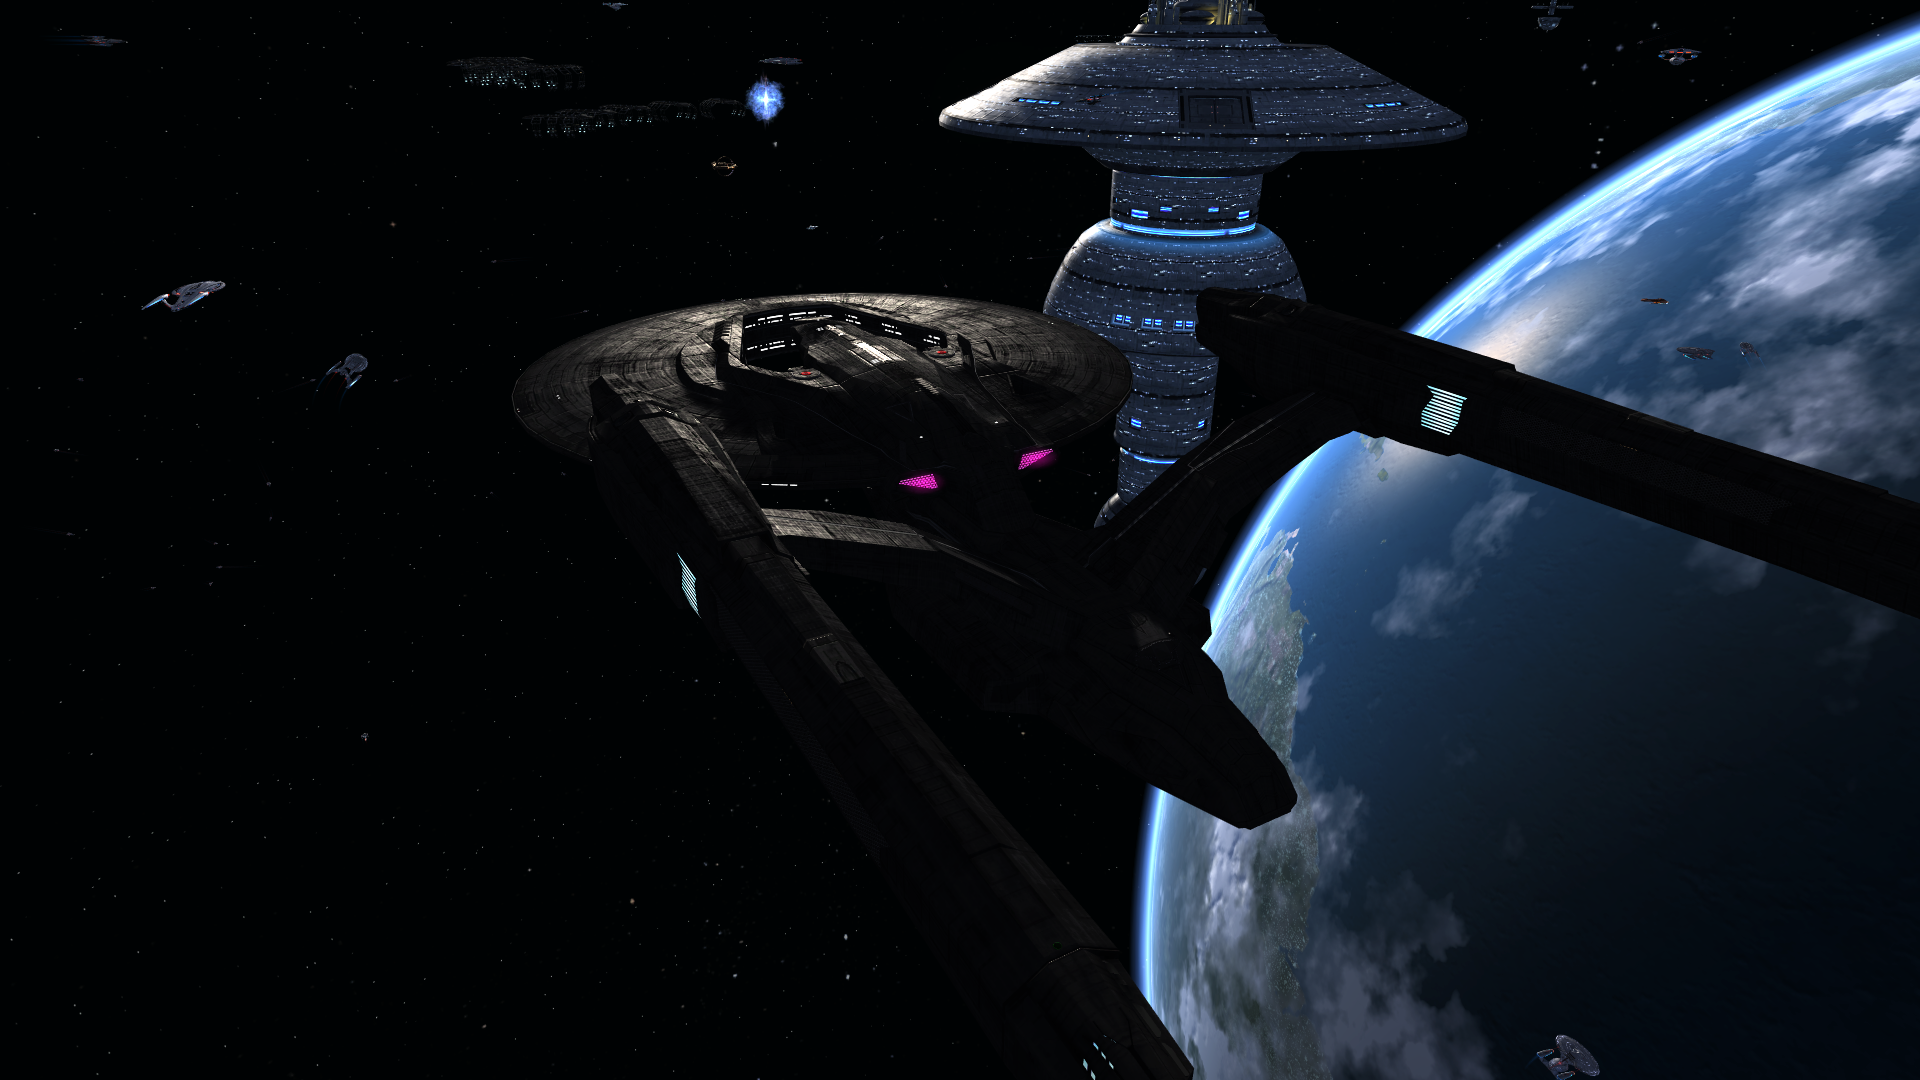 U.S.S. Siliena 
Named after Siliena Ali

Gone but never forgotten.